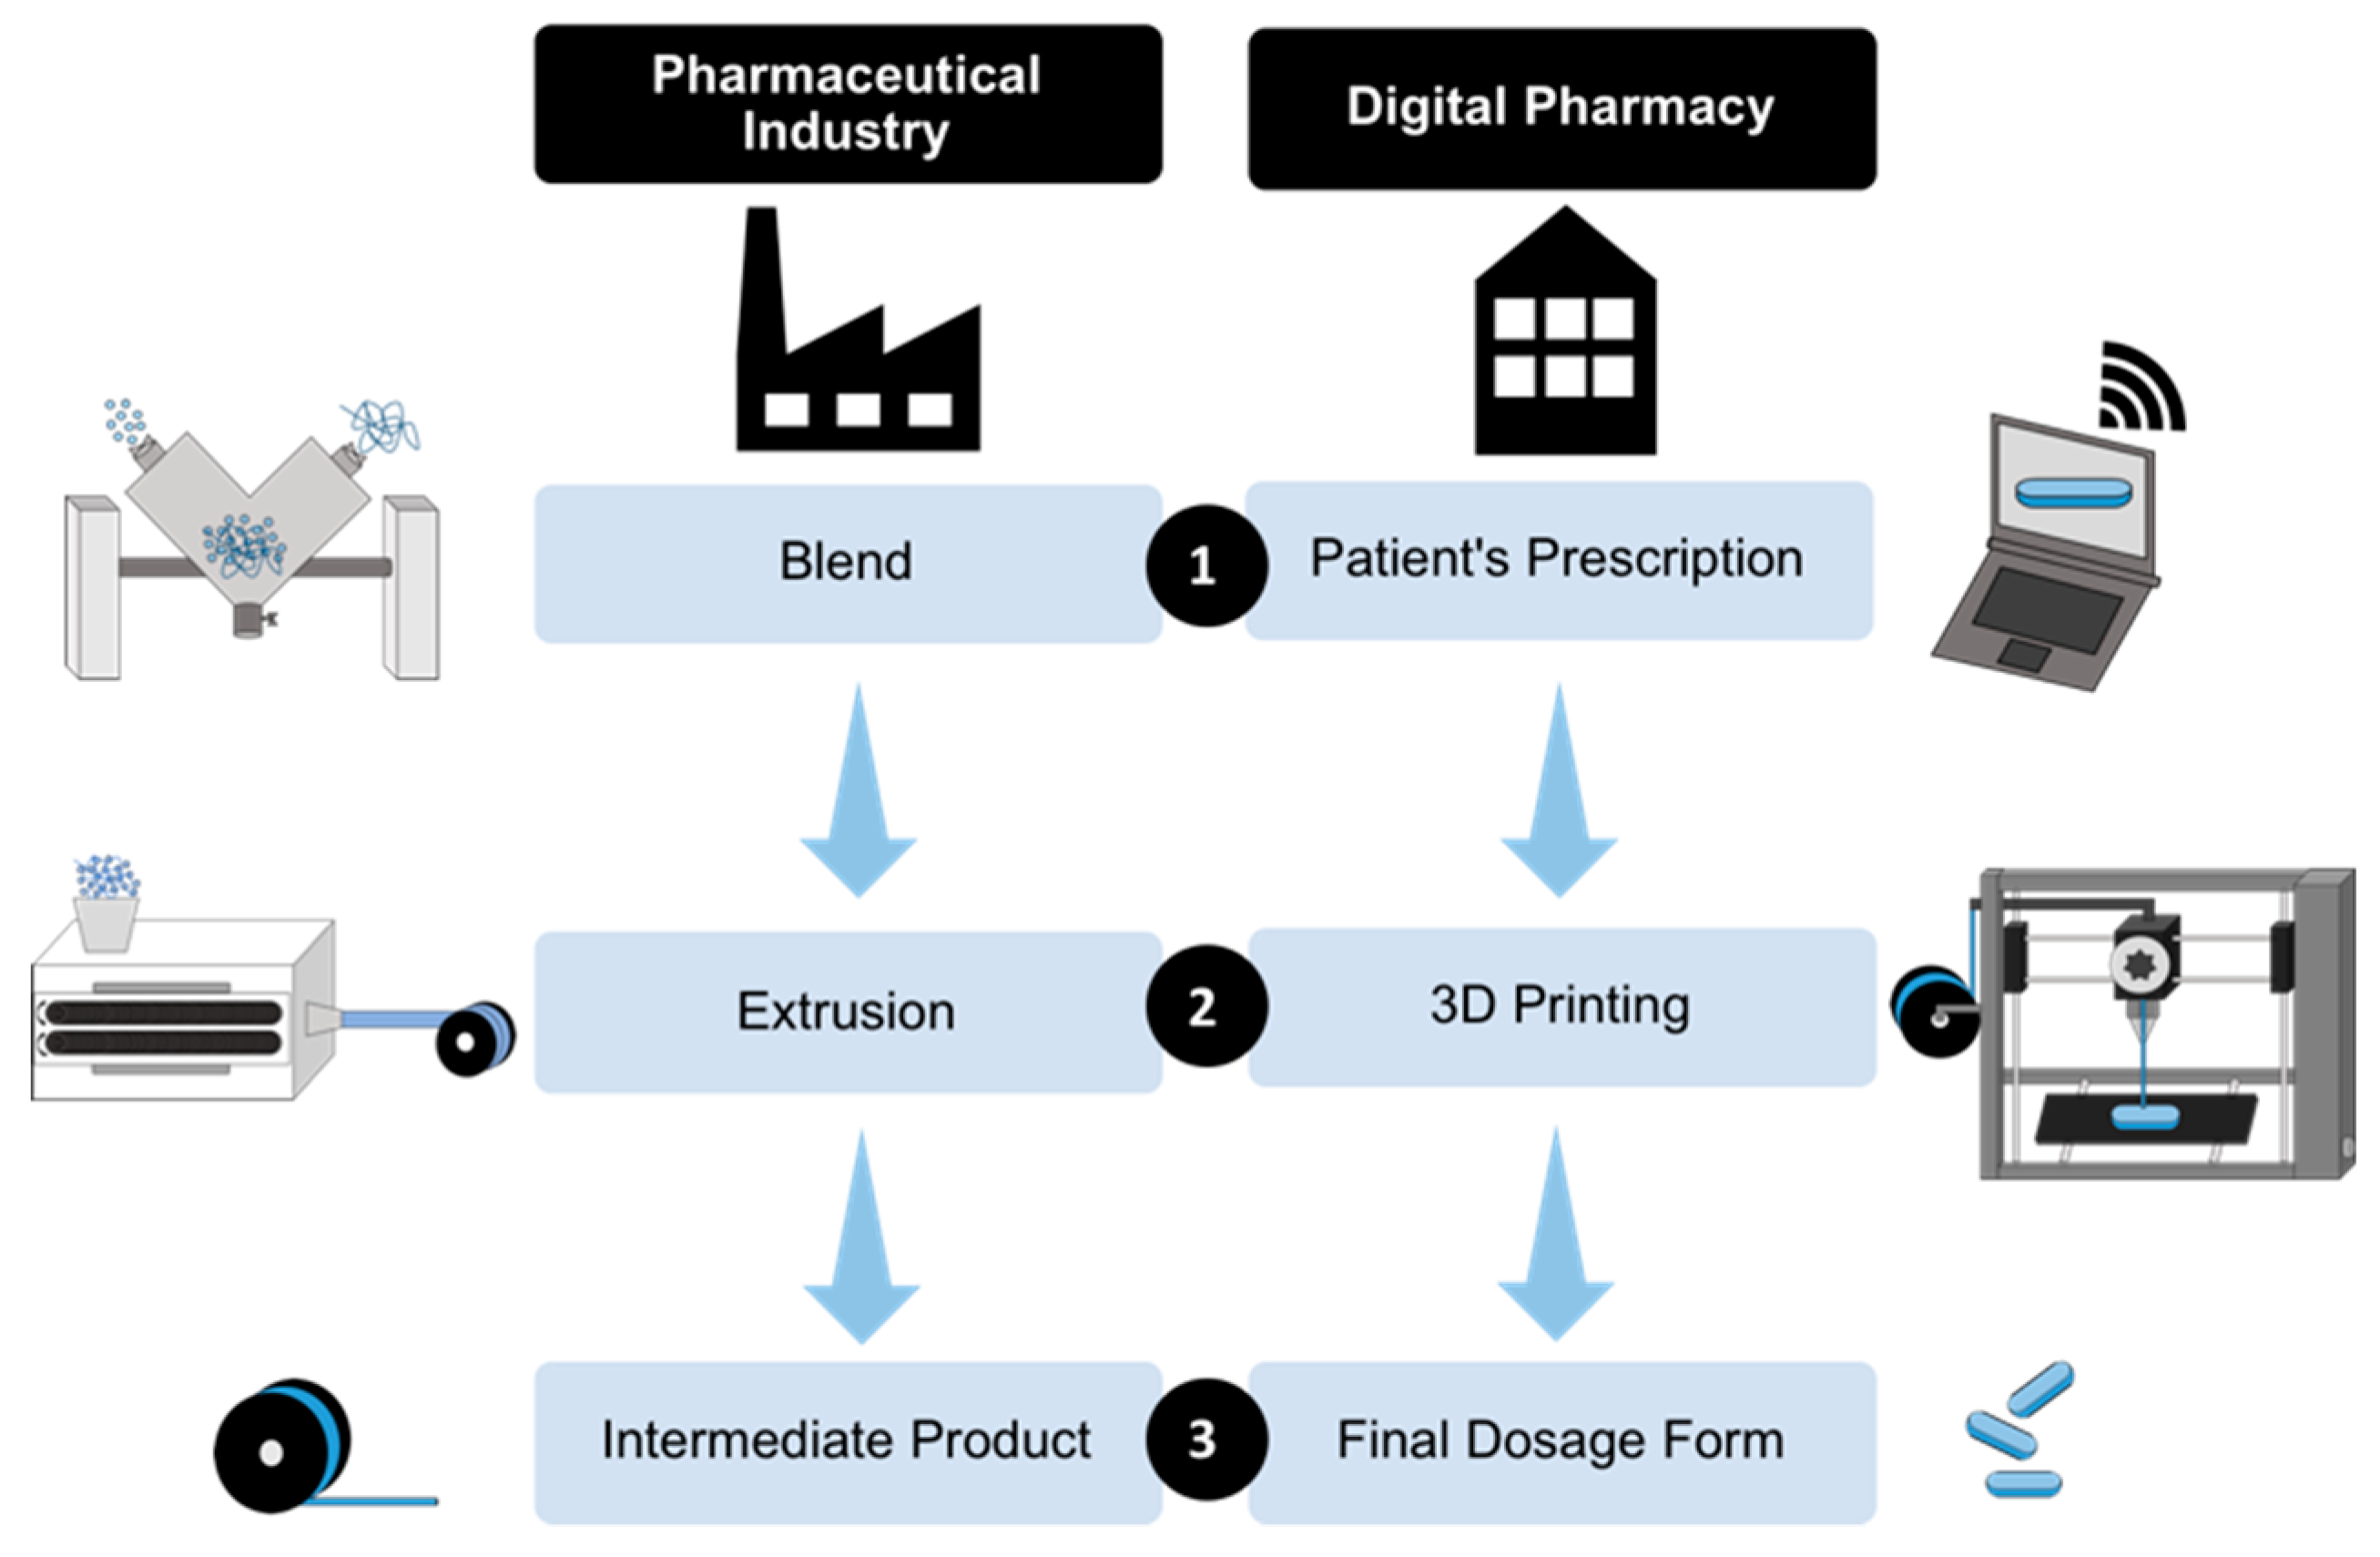 The Digital Pharmacies Era: How 3D Printing Technology Using Fused Deposition Modeling Can Become a Reality - Pharma Excipients